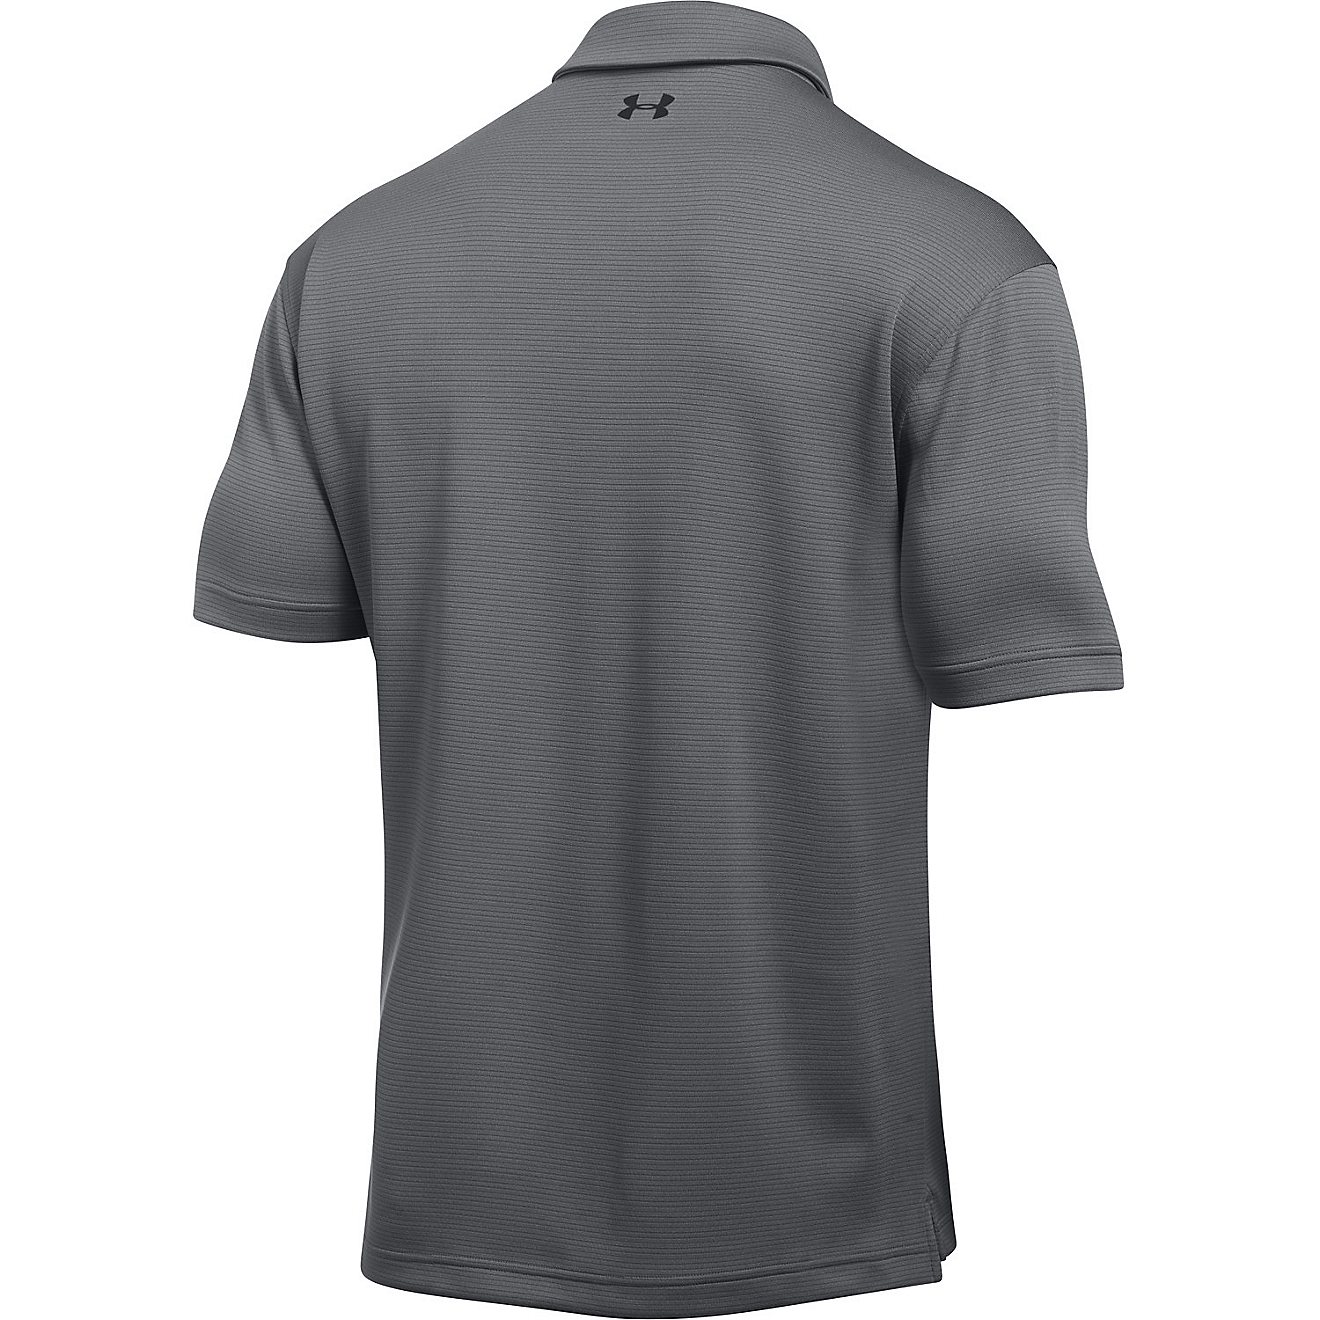 Under Armour Men's New Tech Polo Shirt                                                                                           - view number 2